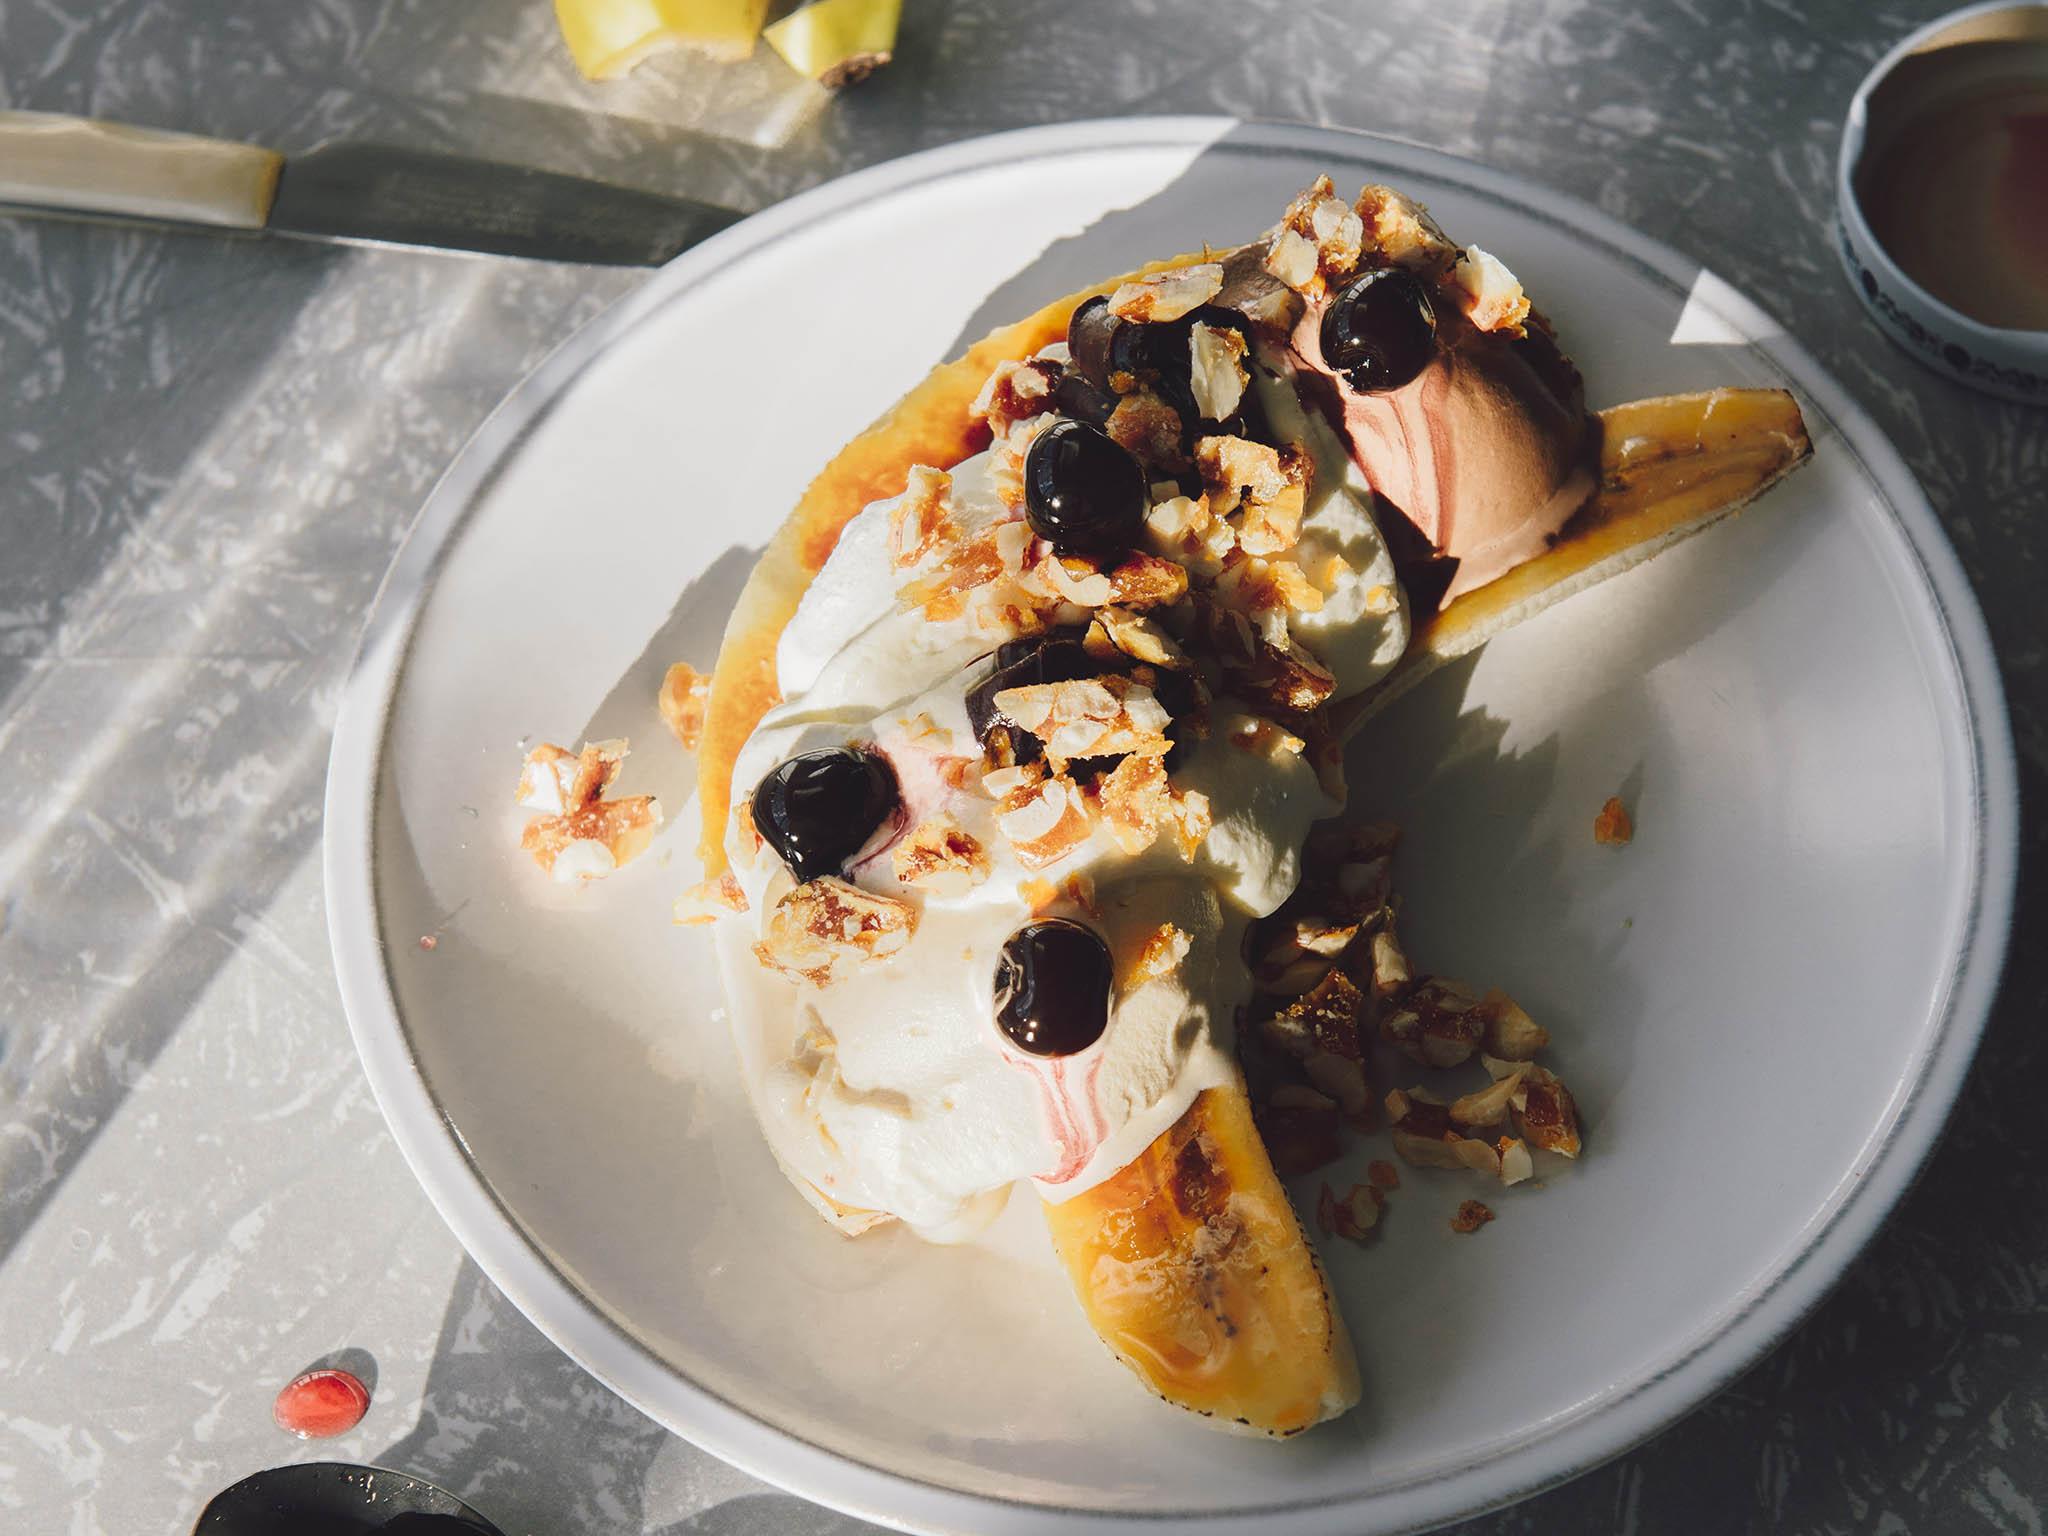 A fresh take on an old classic: golden bananas with chocolate gelato is an irresistible treat